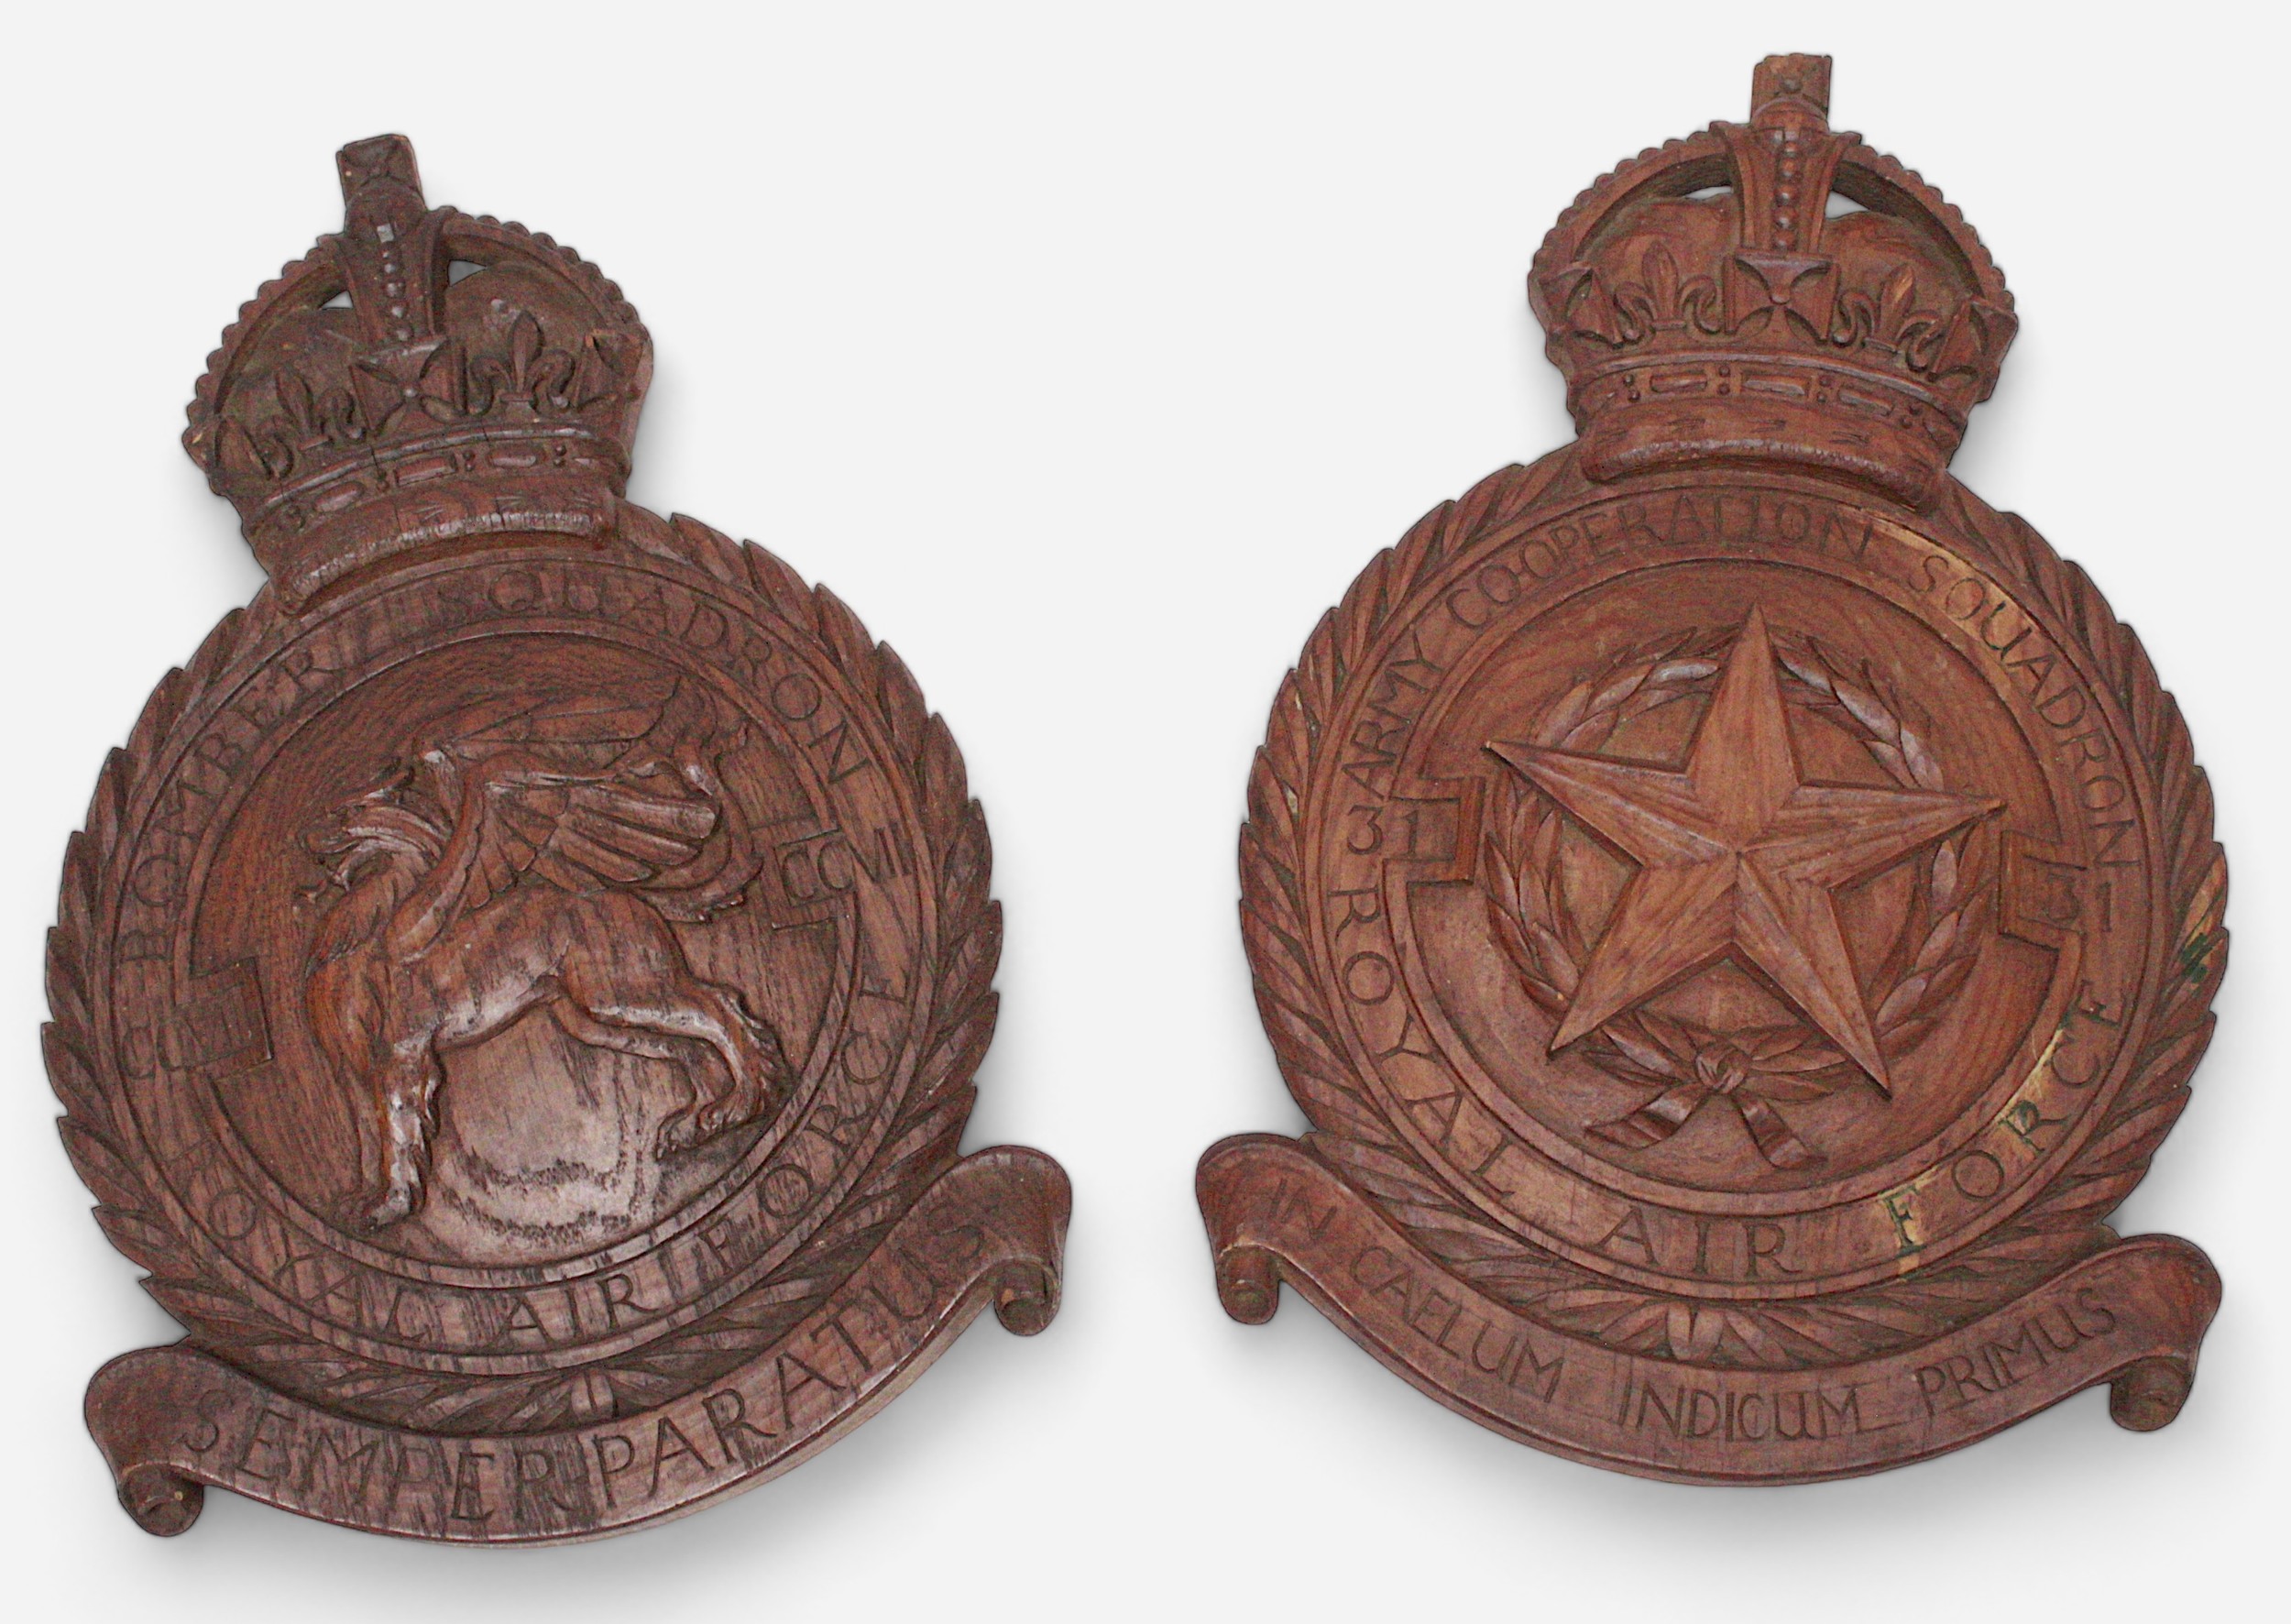 Two carved wooden wall hanging squadron badges, one for the Royal Air Force Army Co-operation